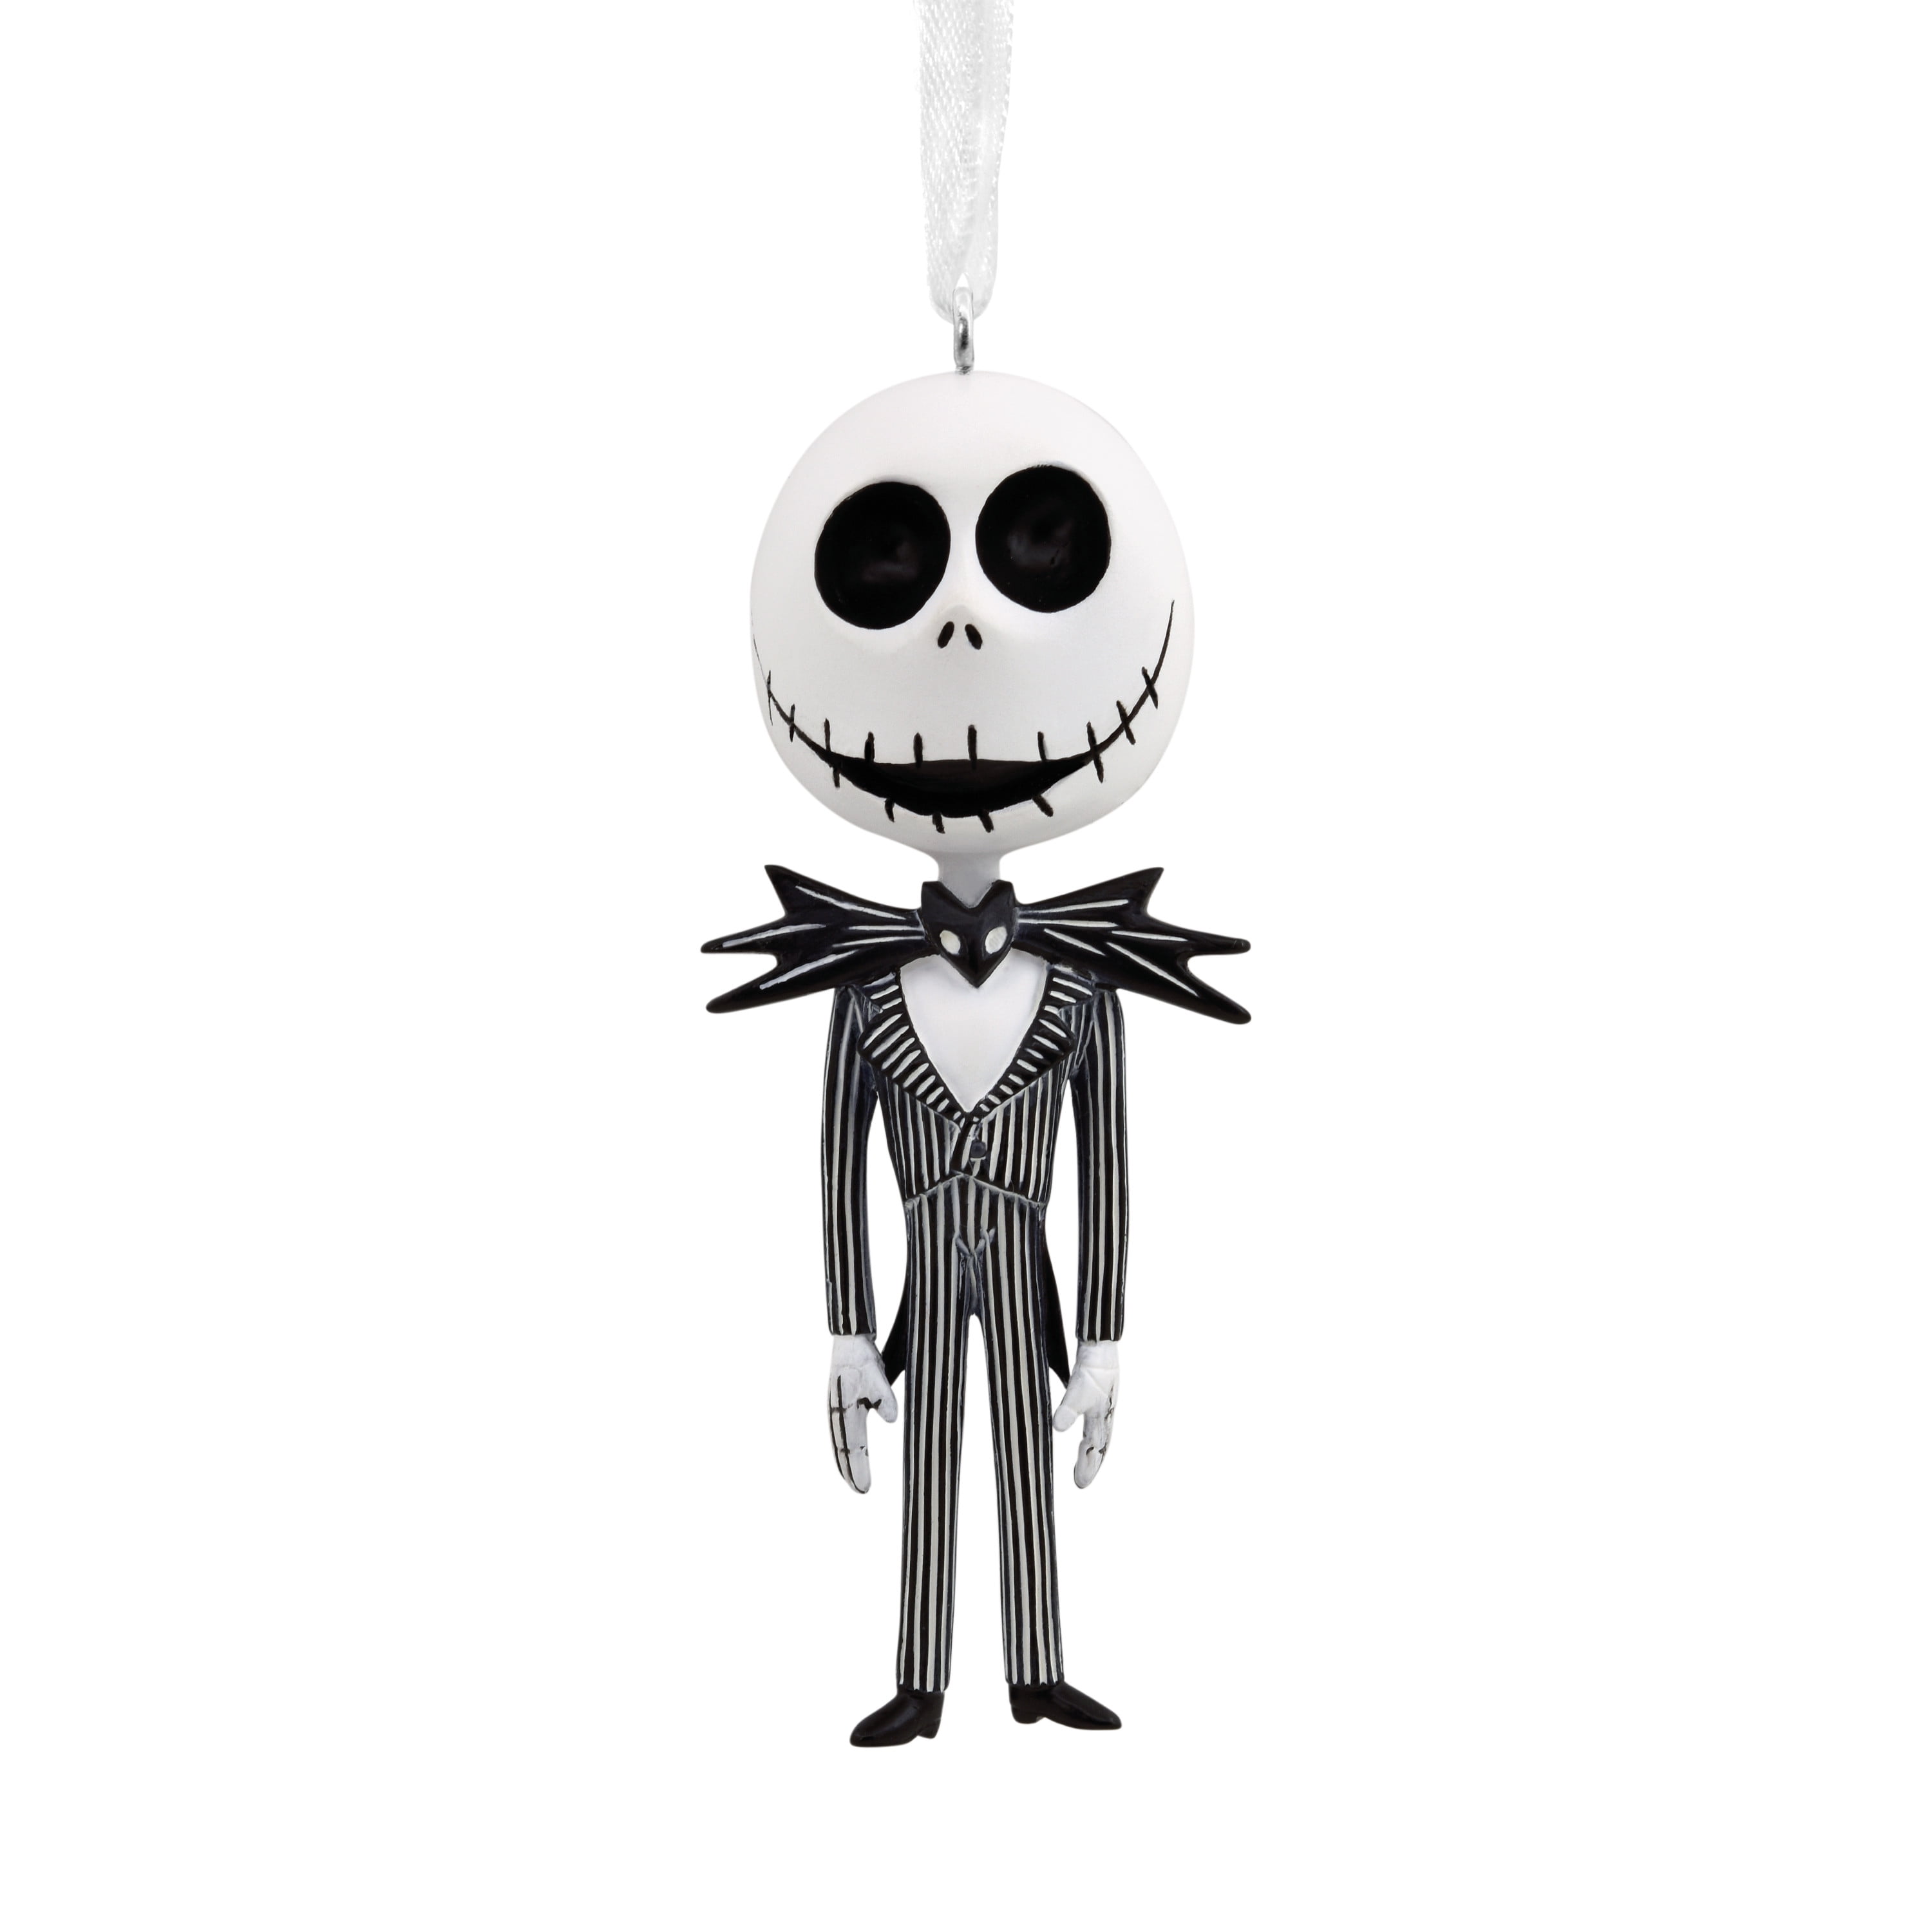 Details about   Hallmark The Nightmare Before Christmas Brand New in Box SALLY Tree Ornament 